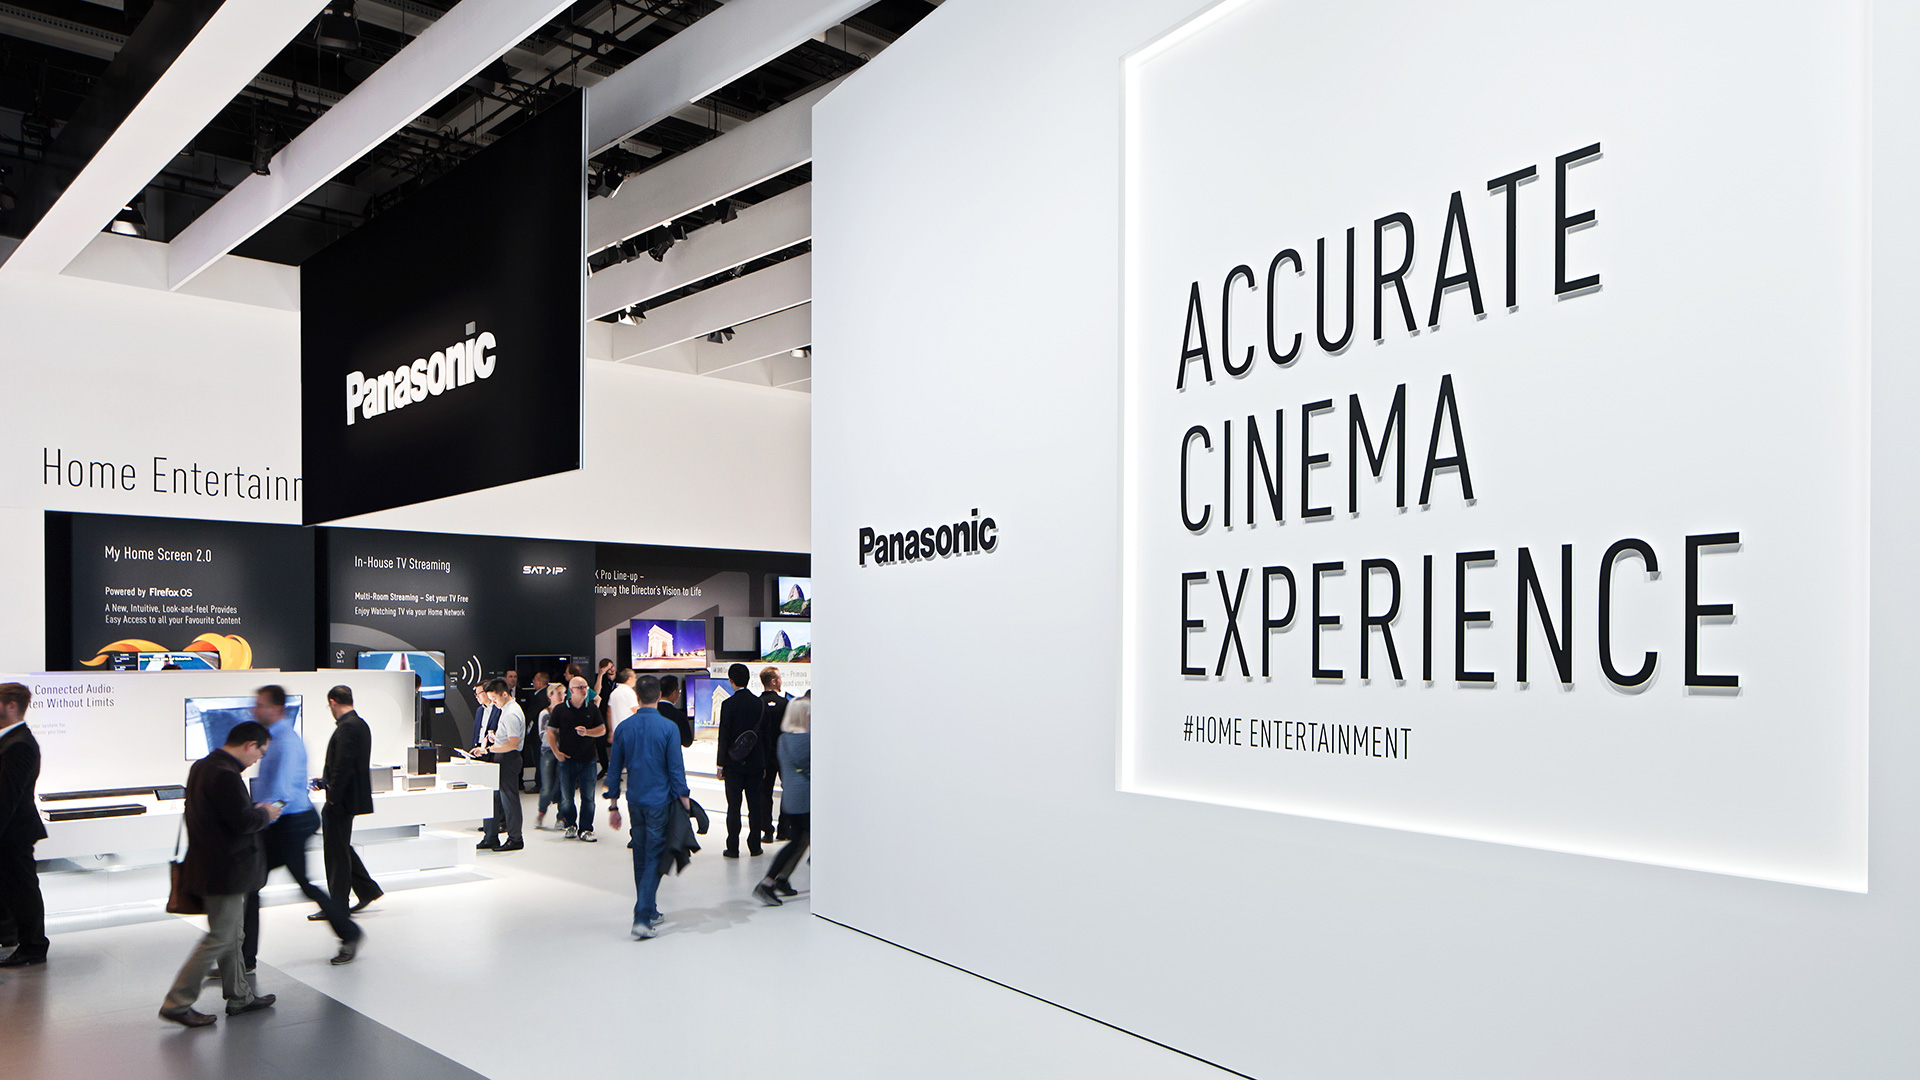 Dart stages the Panasonic fair stand at the IFA 2015